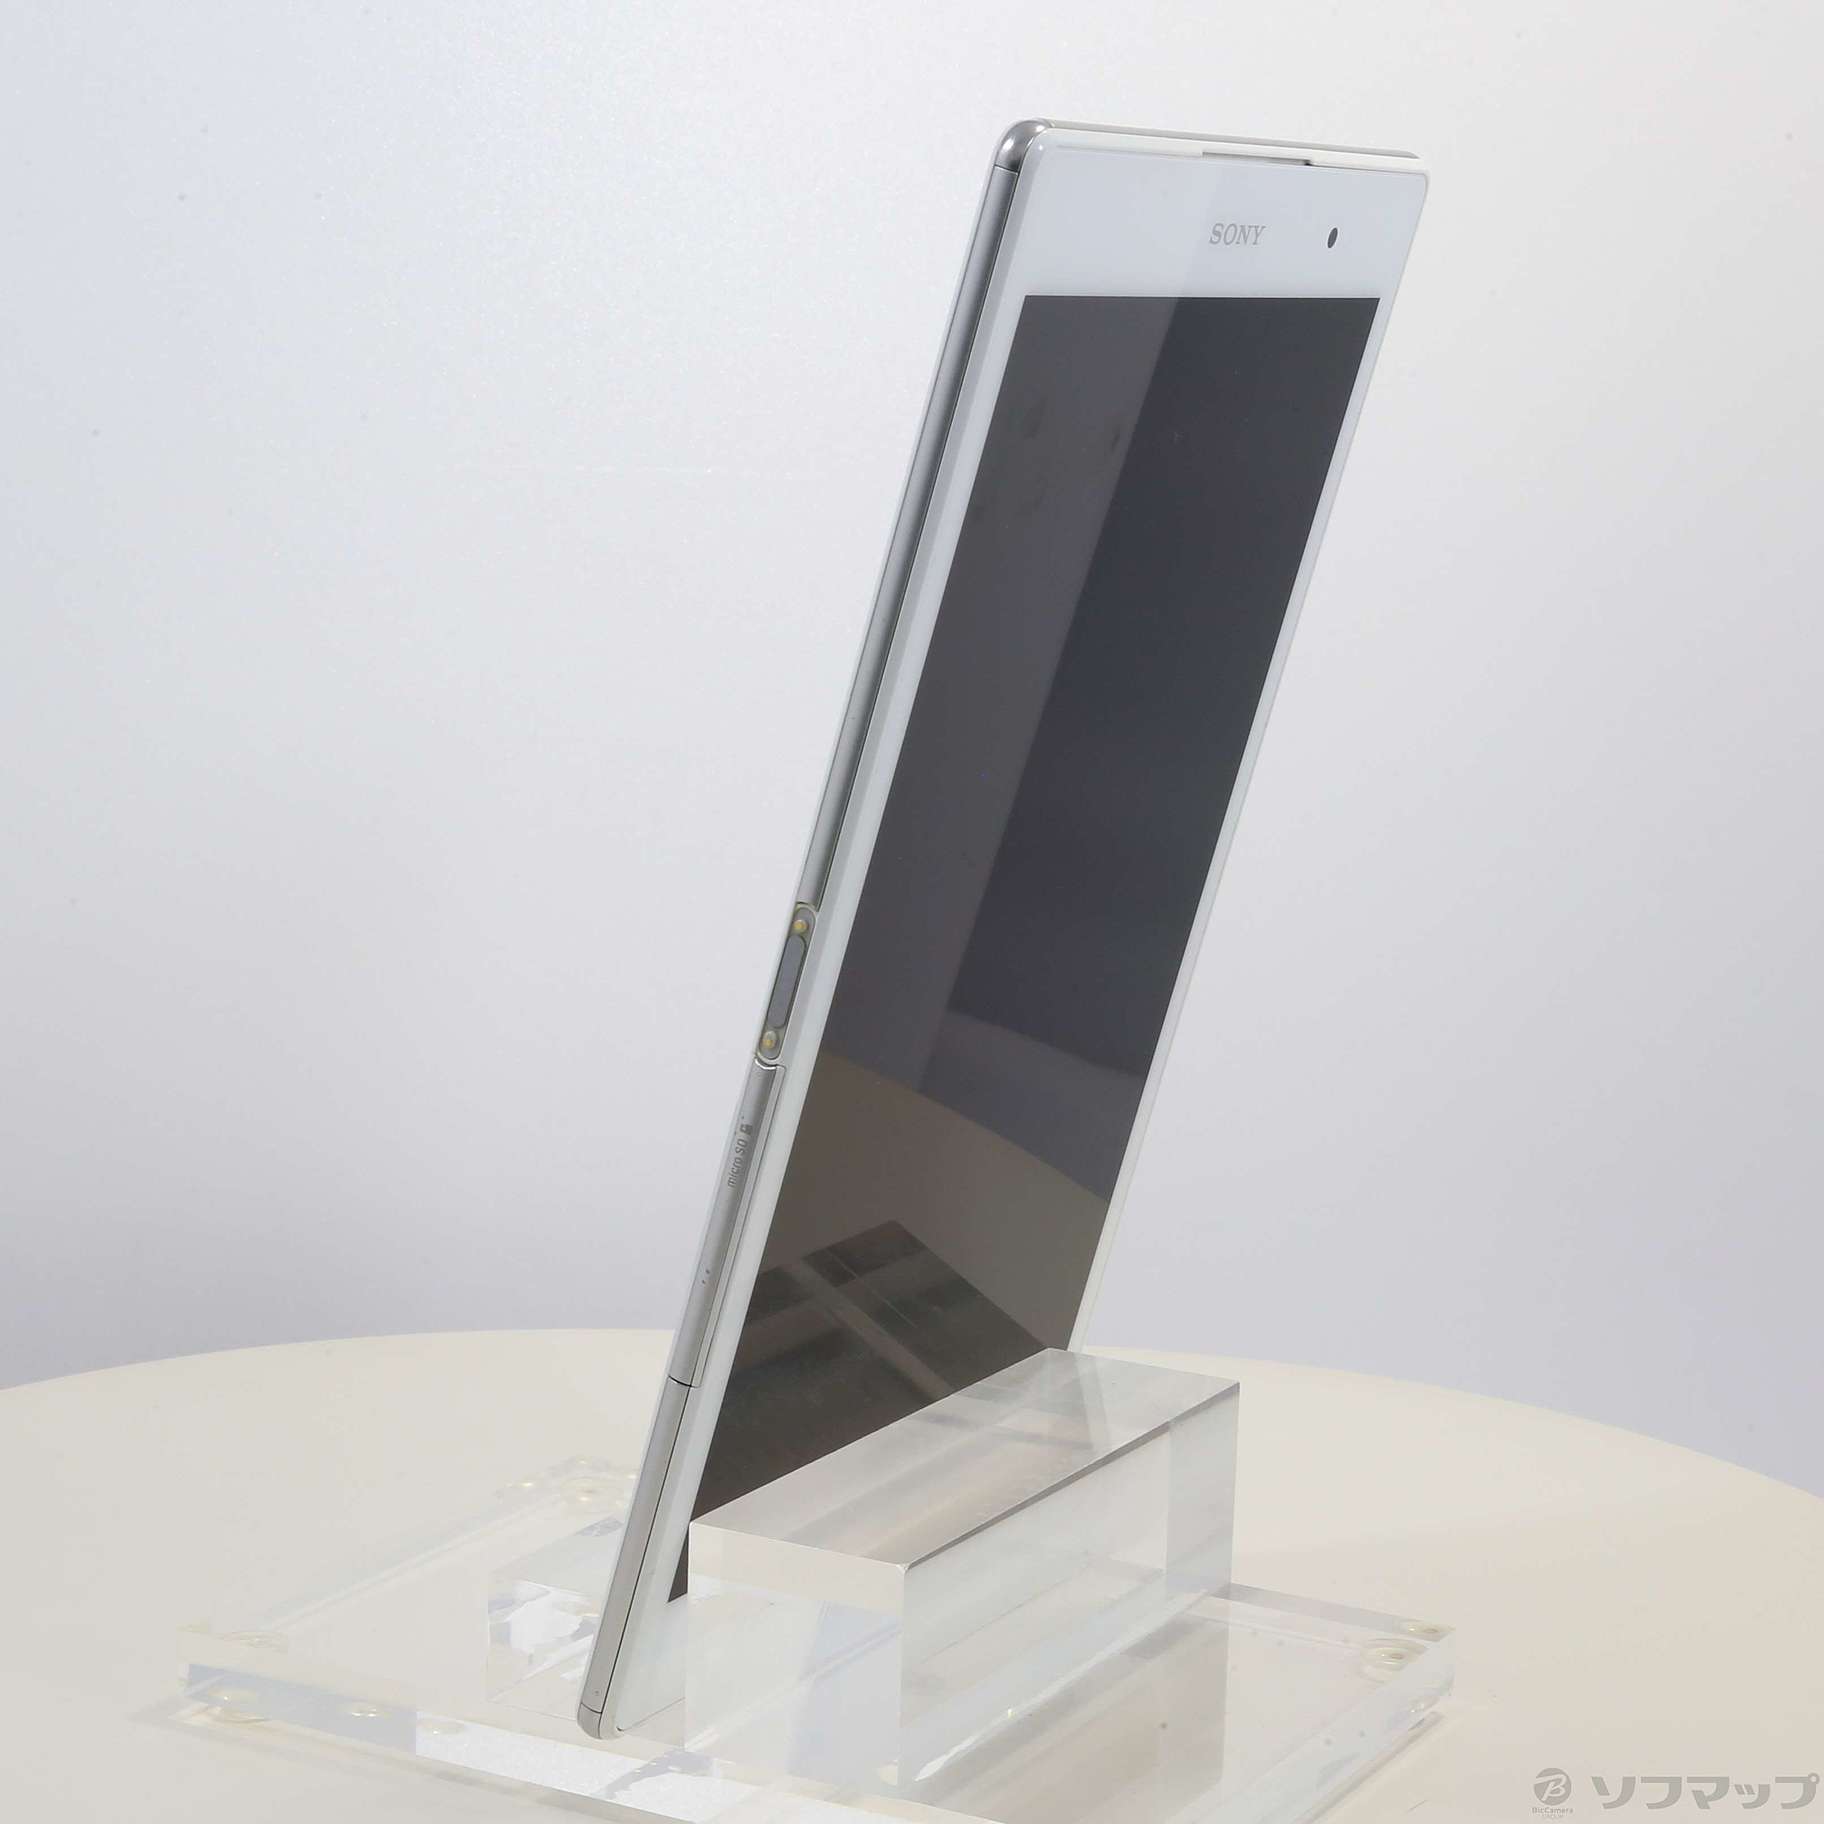 SONY Xperia Z3 tablet SGP612JP/W 箱あり